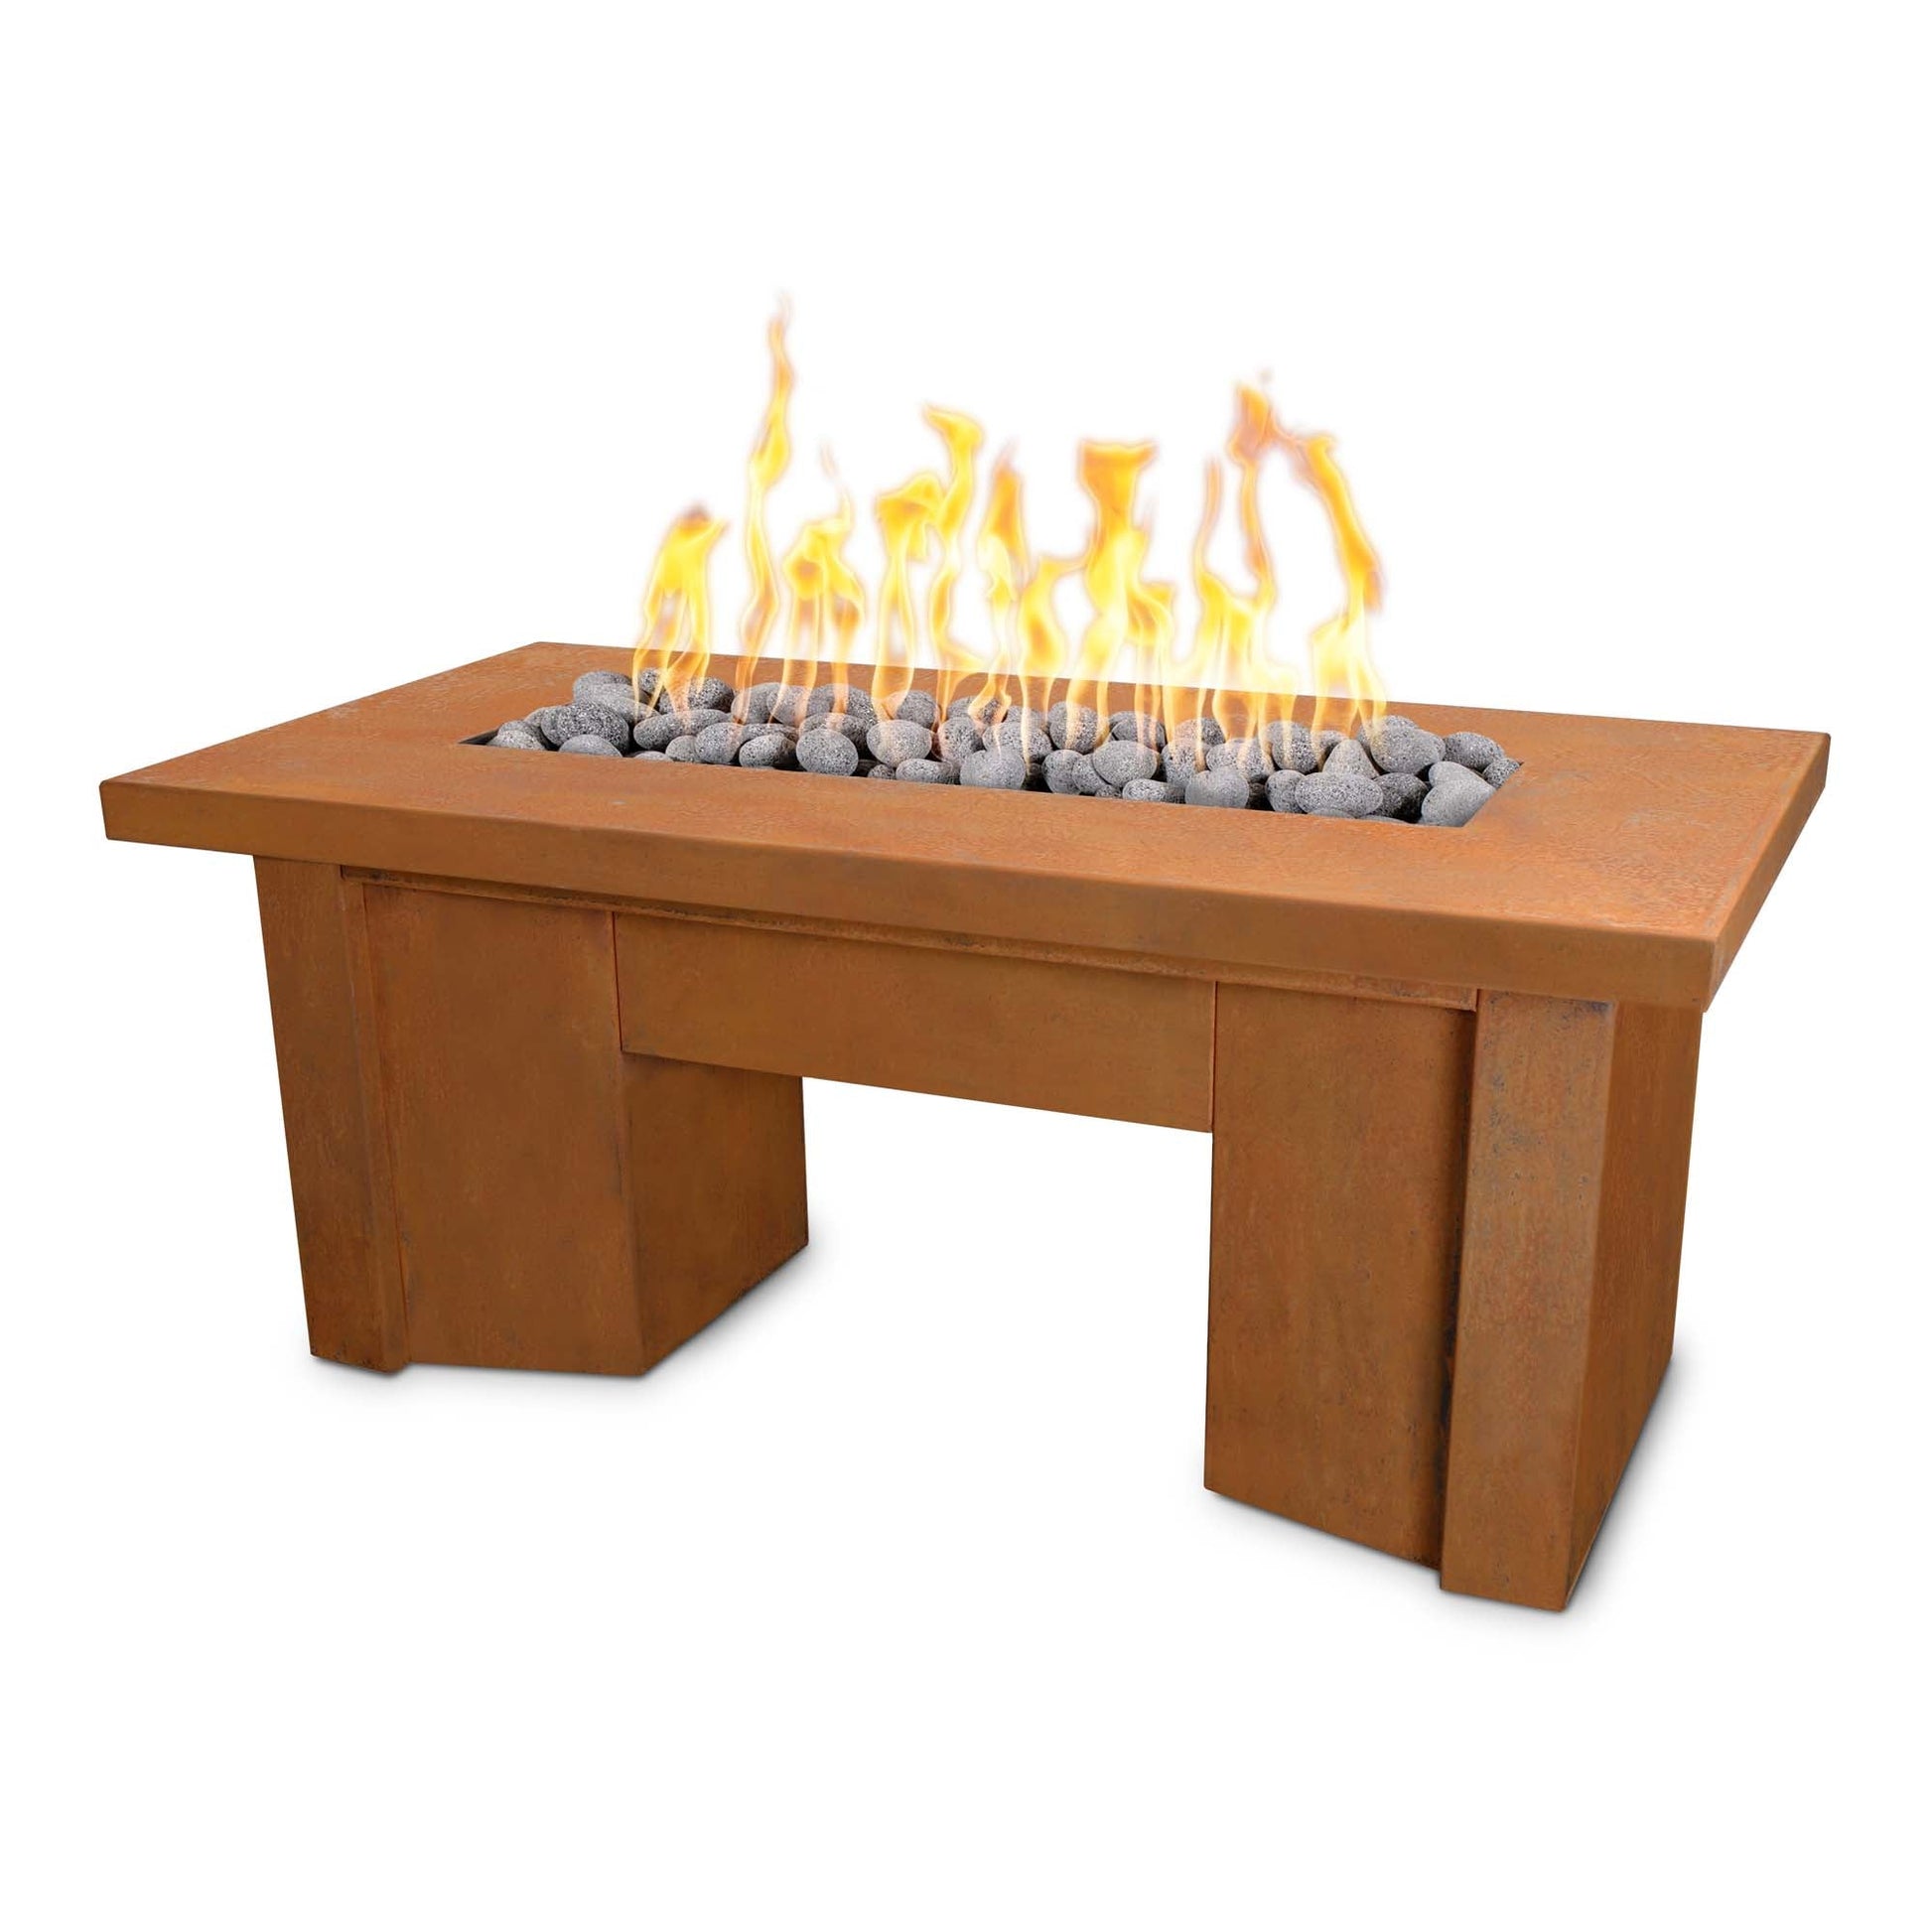 The Outdoor Plus Rectangular Alameda 78" Corten Steel Liquid Propane Fire Pit with Flame Sense with Spark Ignition